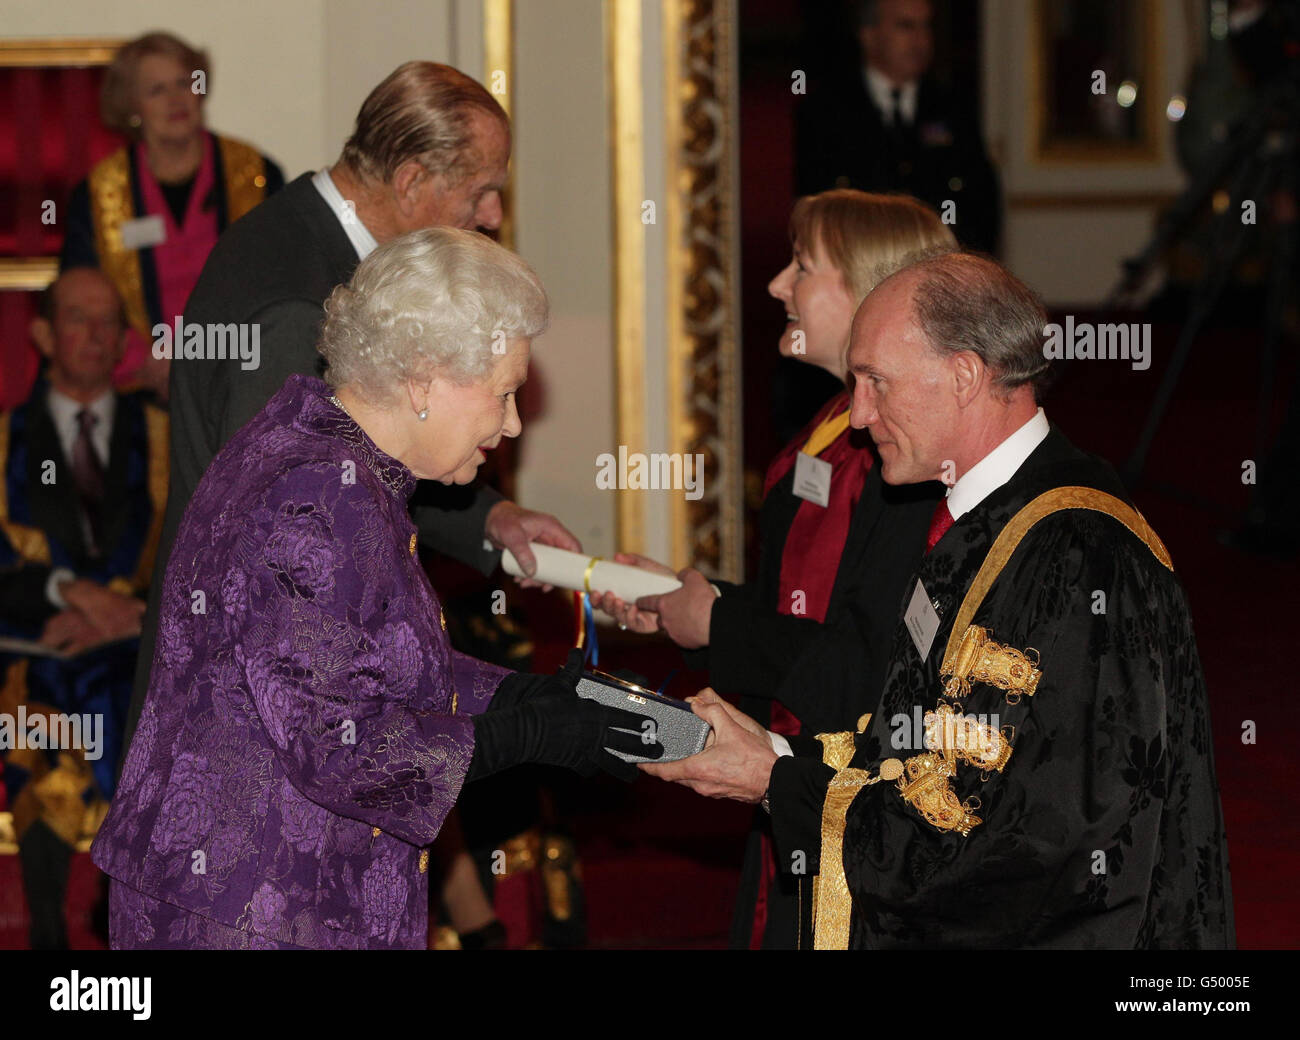 Queen Elizabeth II and The Duke of Edinburgh present a Royal Anniversary Prize for Higher and Further Education to Professor David Greenaway and Professor Katherine Smart of the University of Nottingham, at Buckingham Palace, central London. Stock Photo